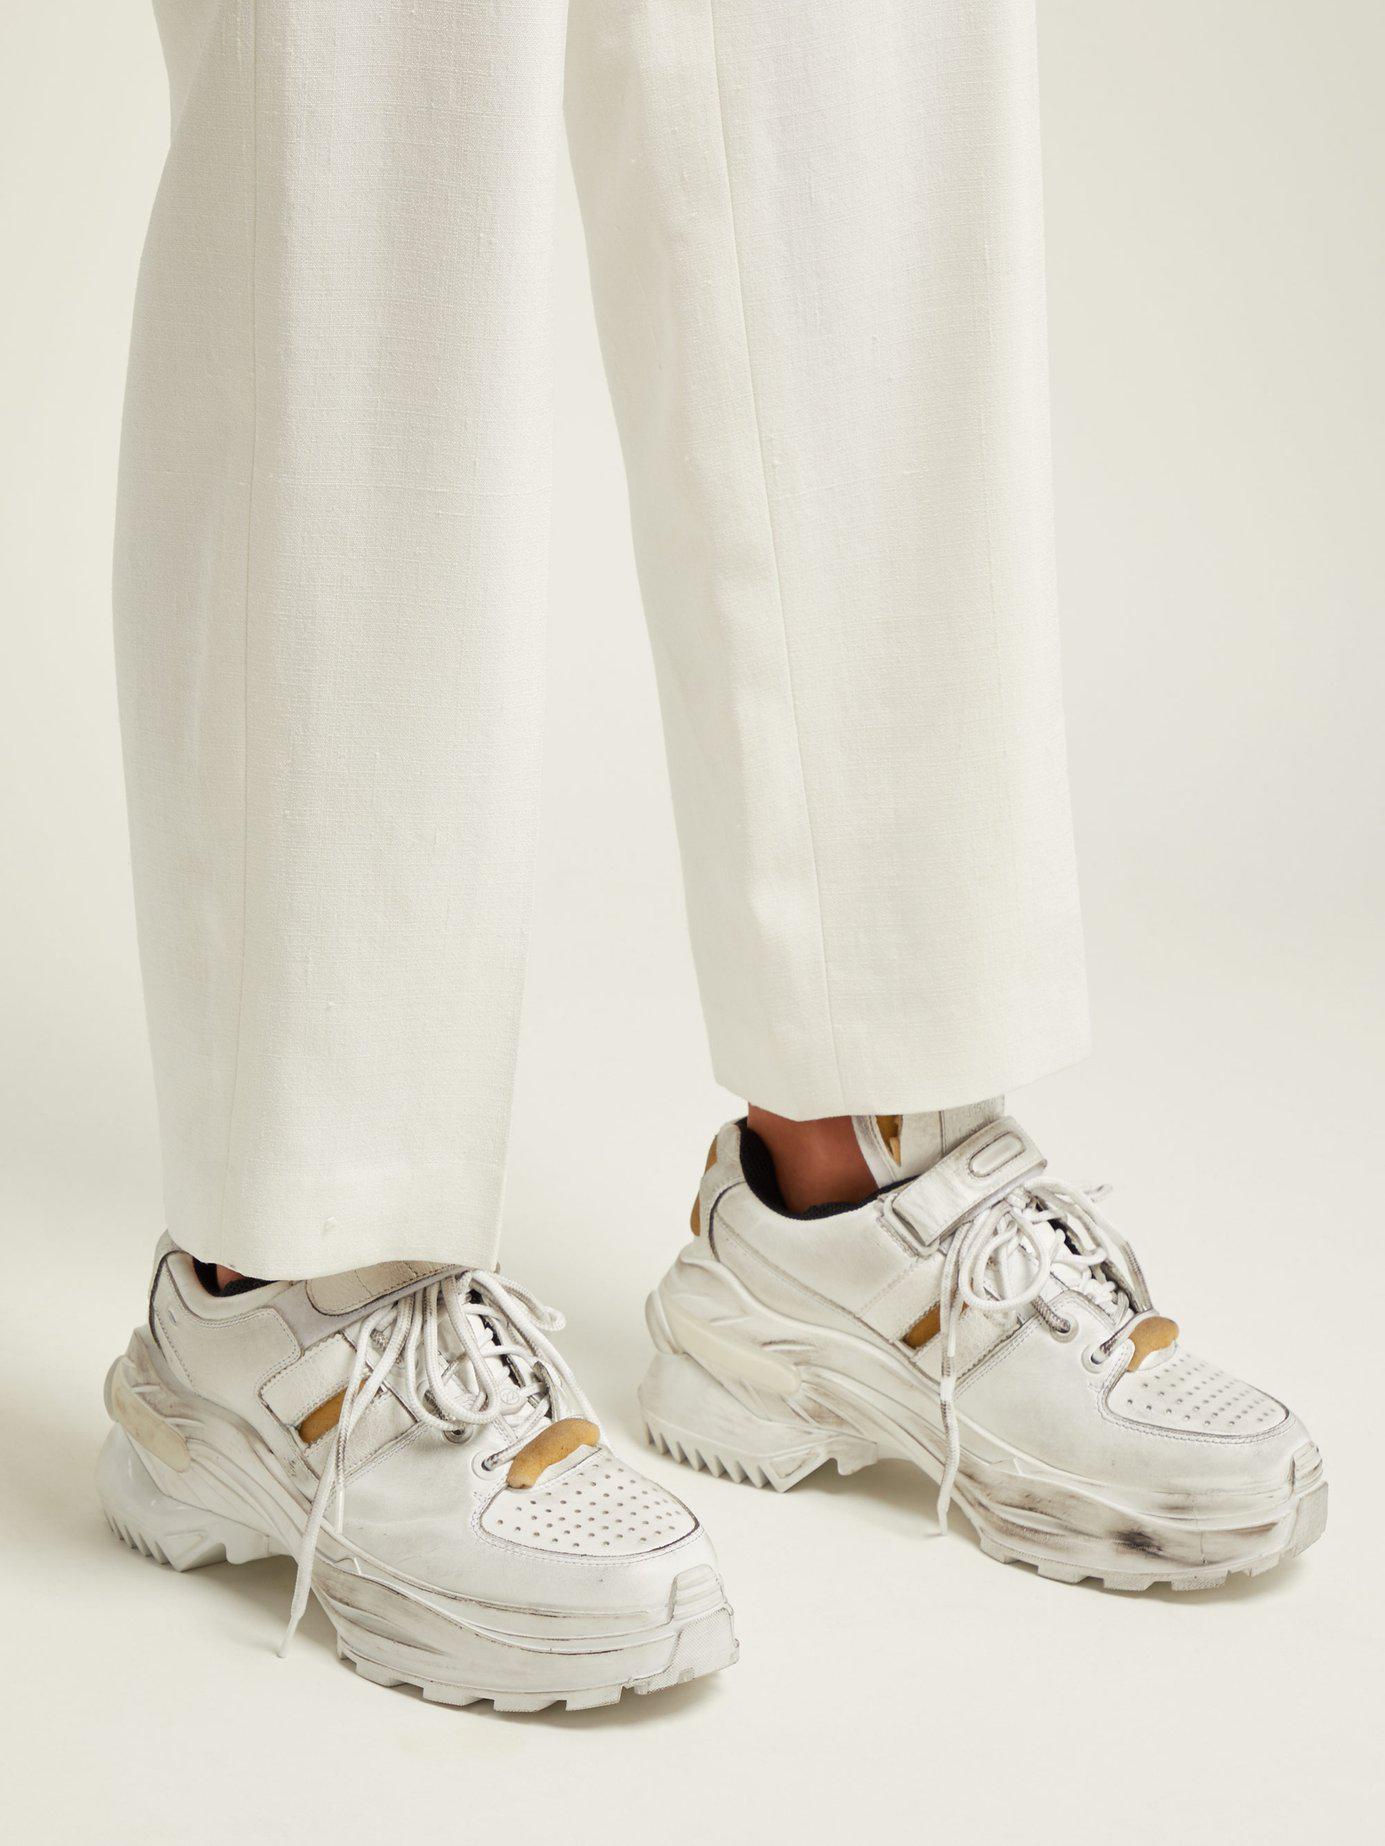 Maison Margiela Retro Fit Deconstructed Low-top Leather Trainers in White |  Lyst